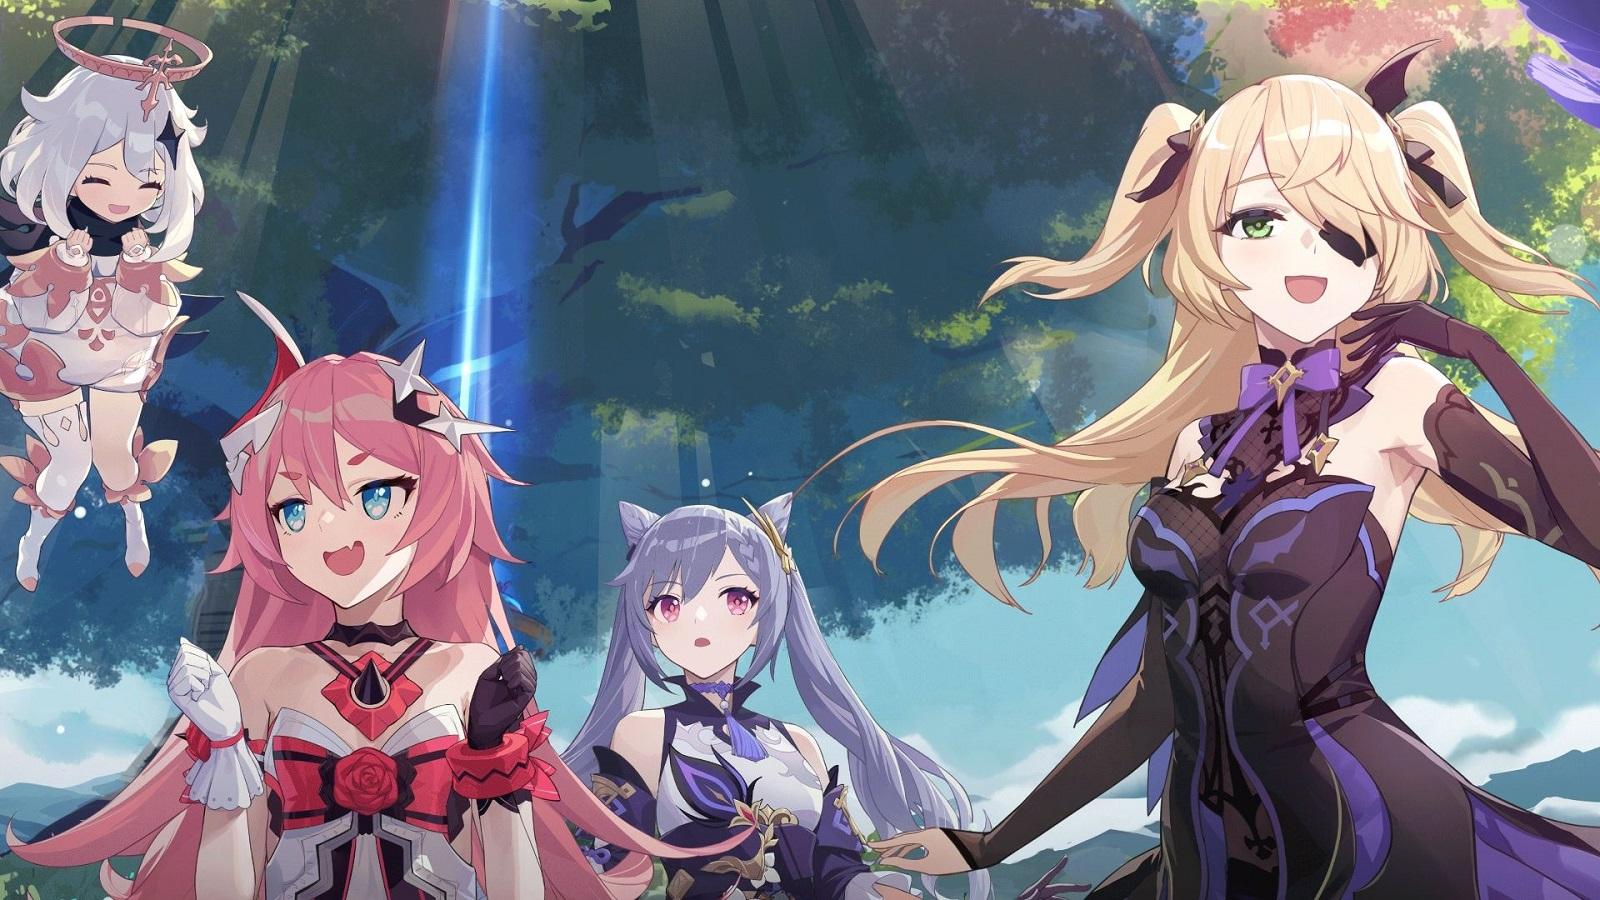 Fischl with Keqing in Honkai Impact